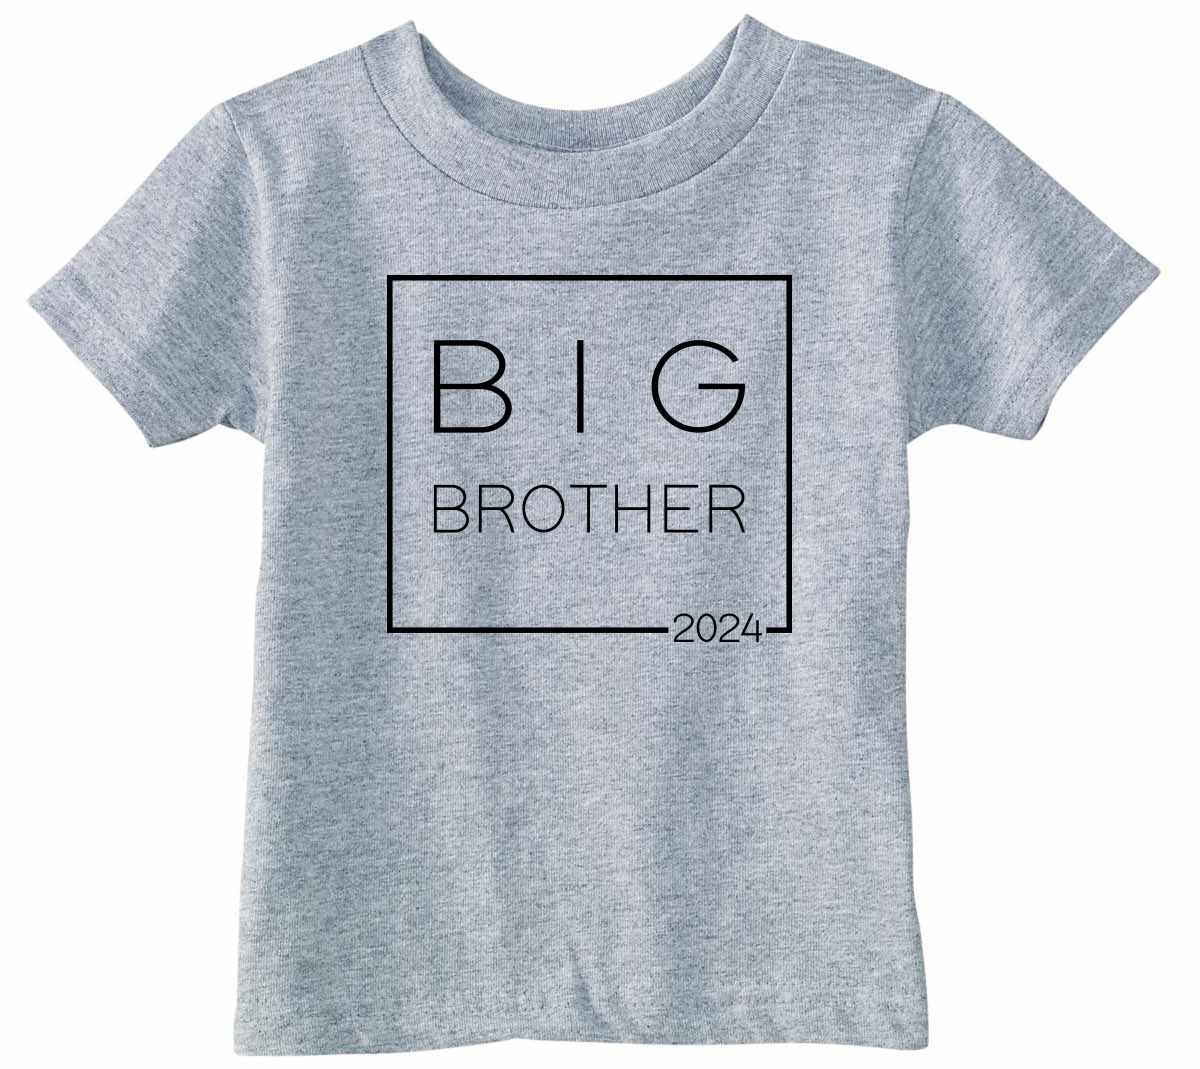 Big Brother Box 2024 on Infant-Toddler T-Shirt (#1387-7)